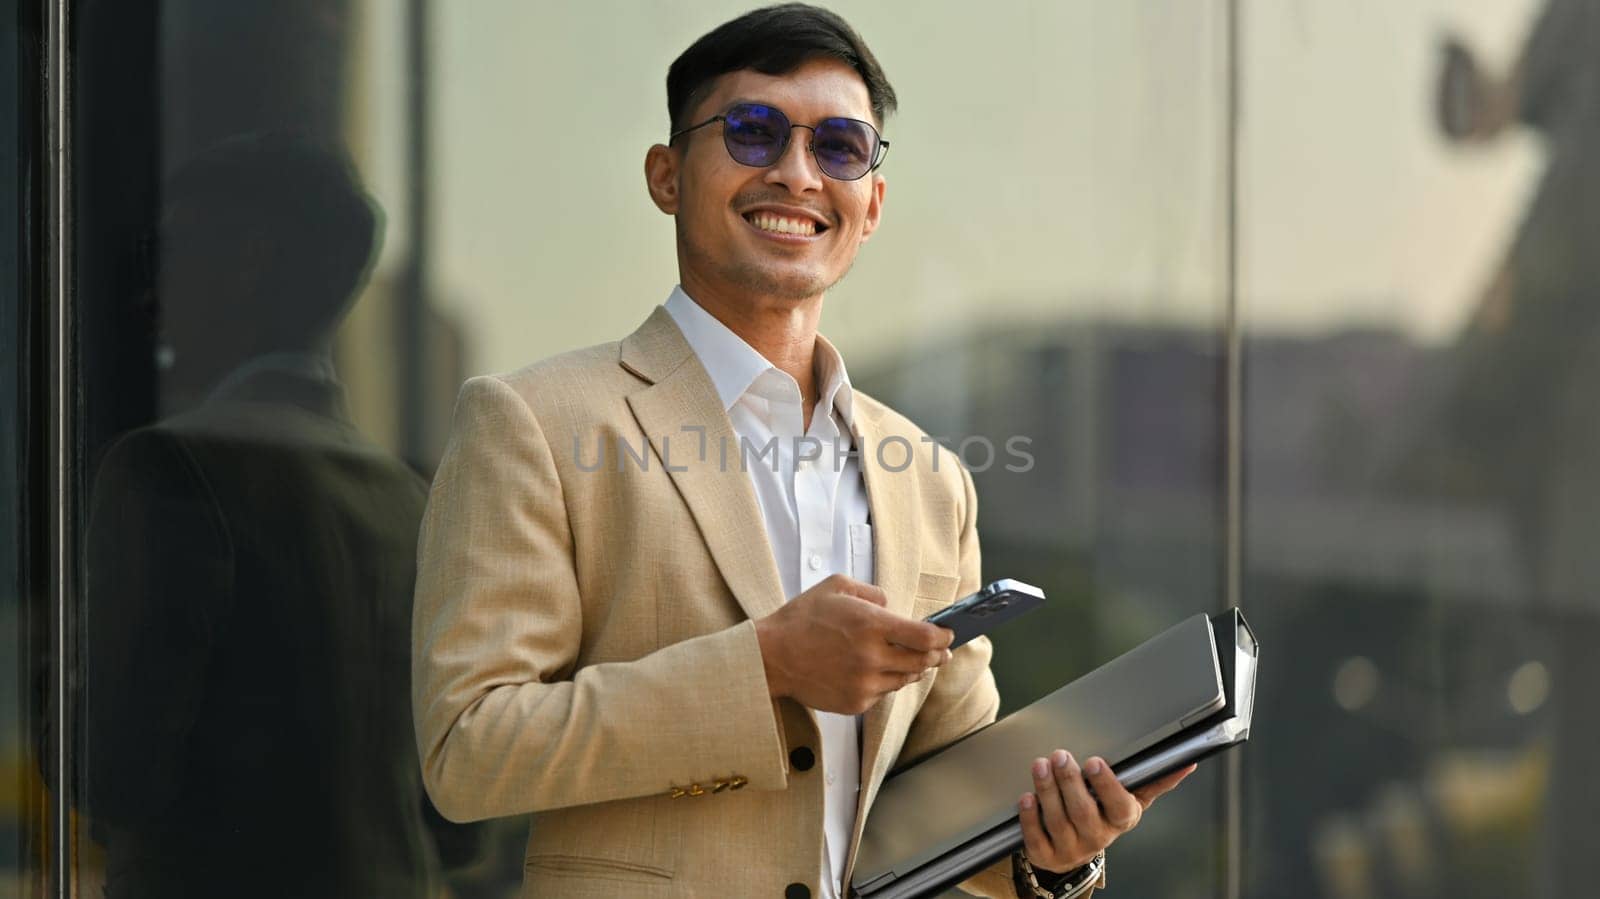 Confident young businessman in elegant suit using smartphone at outdoor. Technology, people and city life concept.